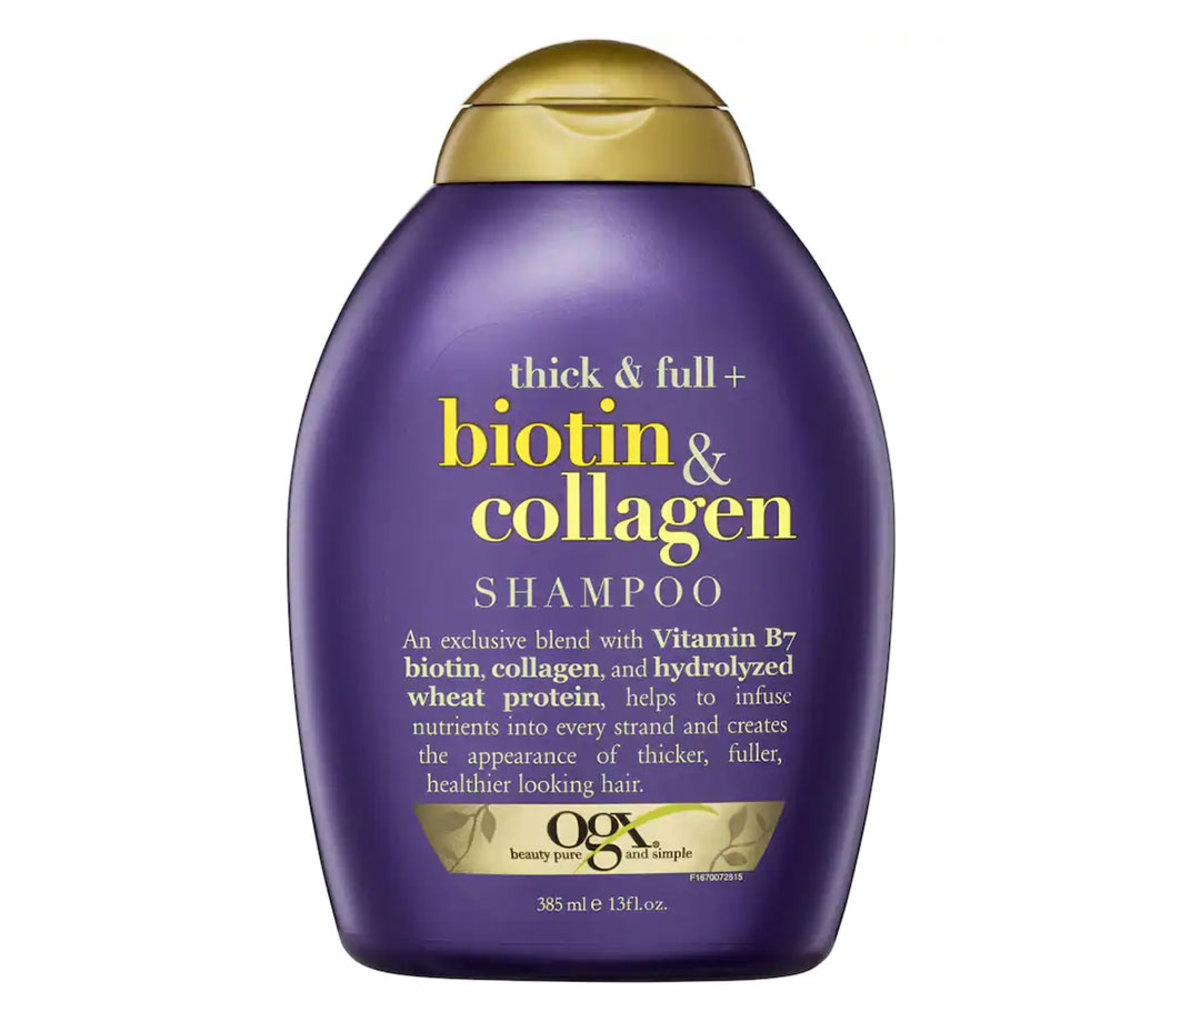 The 9 Best Shampoos and Conditioners for Red Hair | Who What Wear